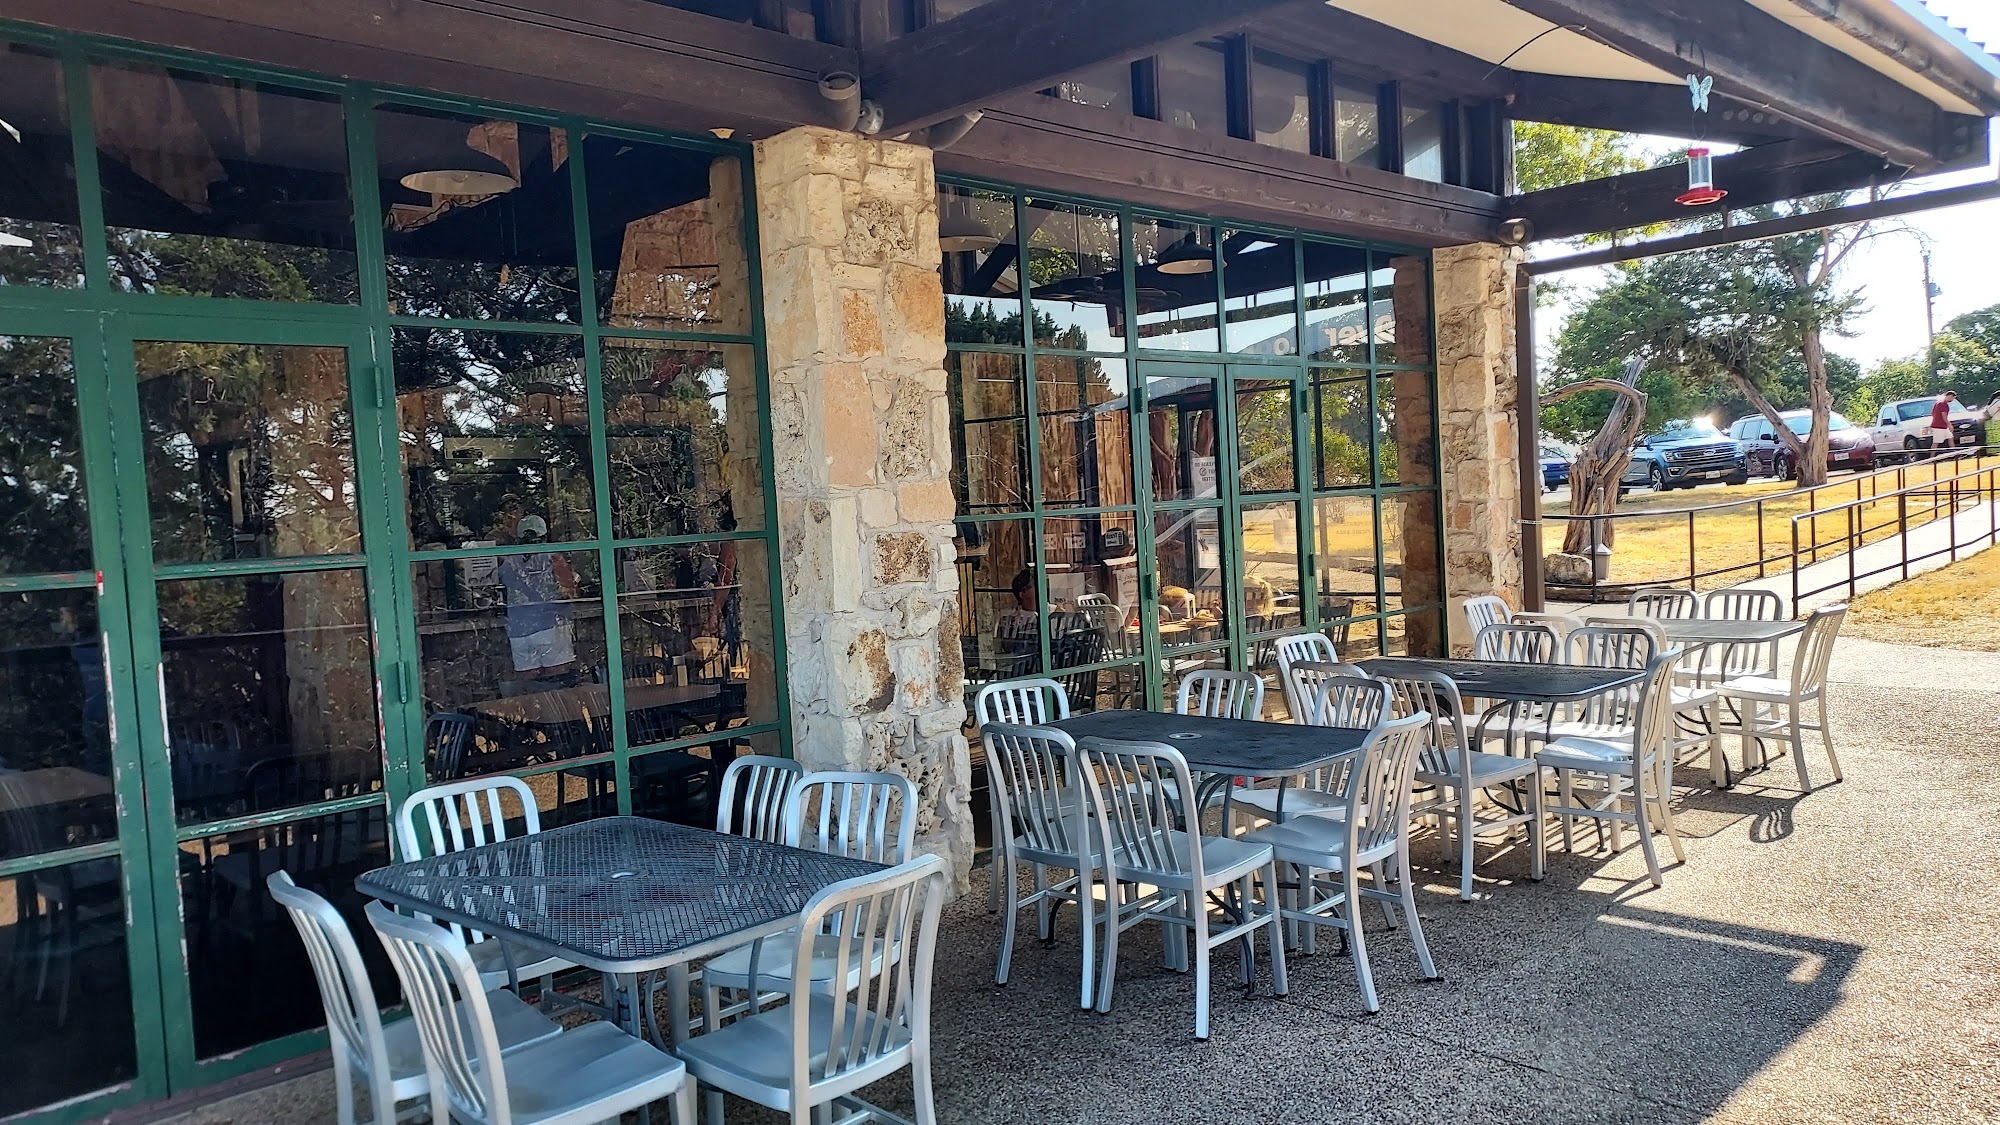 The Overlook Cafe